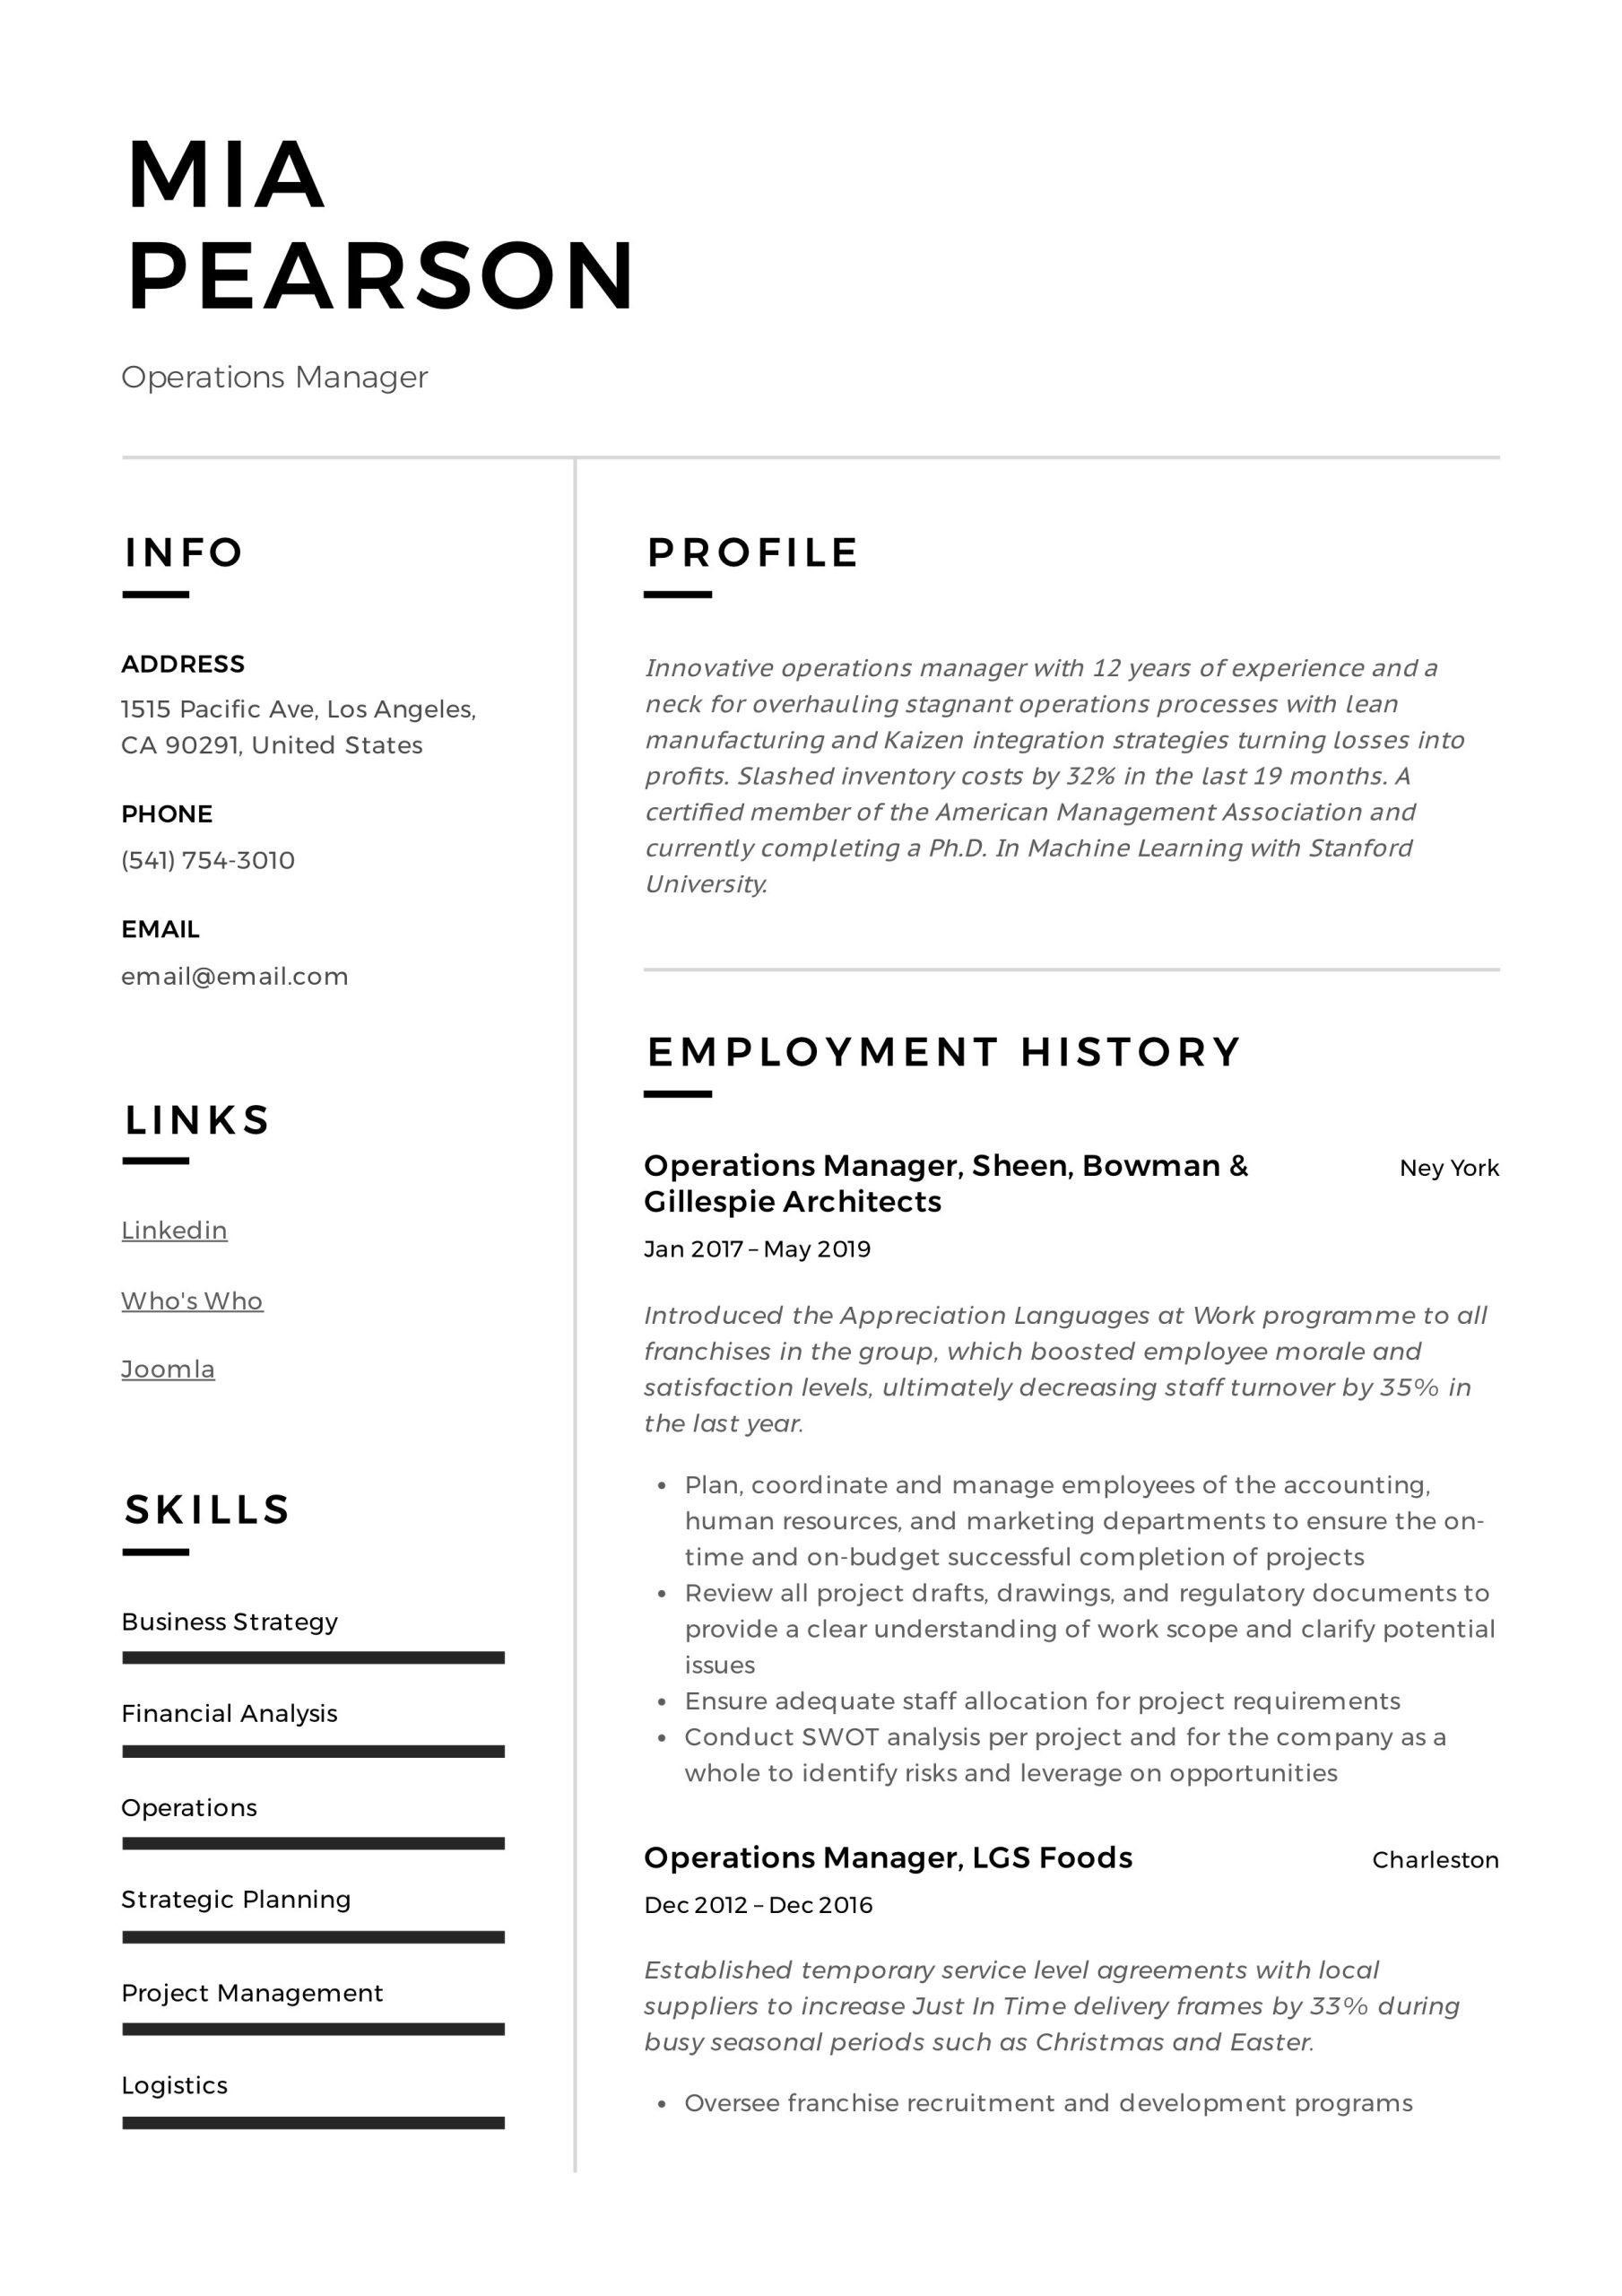 Sample Resume for Professional Sports Player Turned Business Executive Operations Manager Resume & Writing Guide  12 Examples Pdf